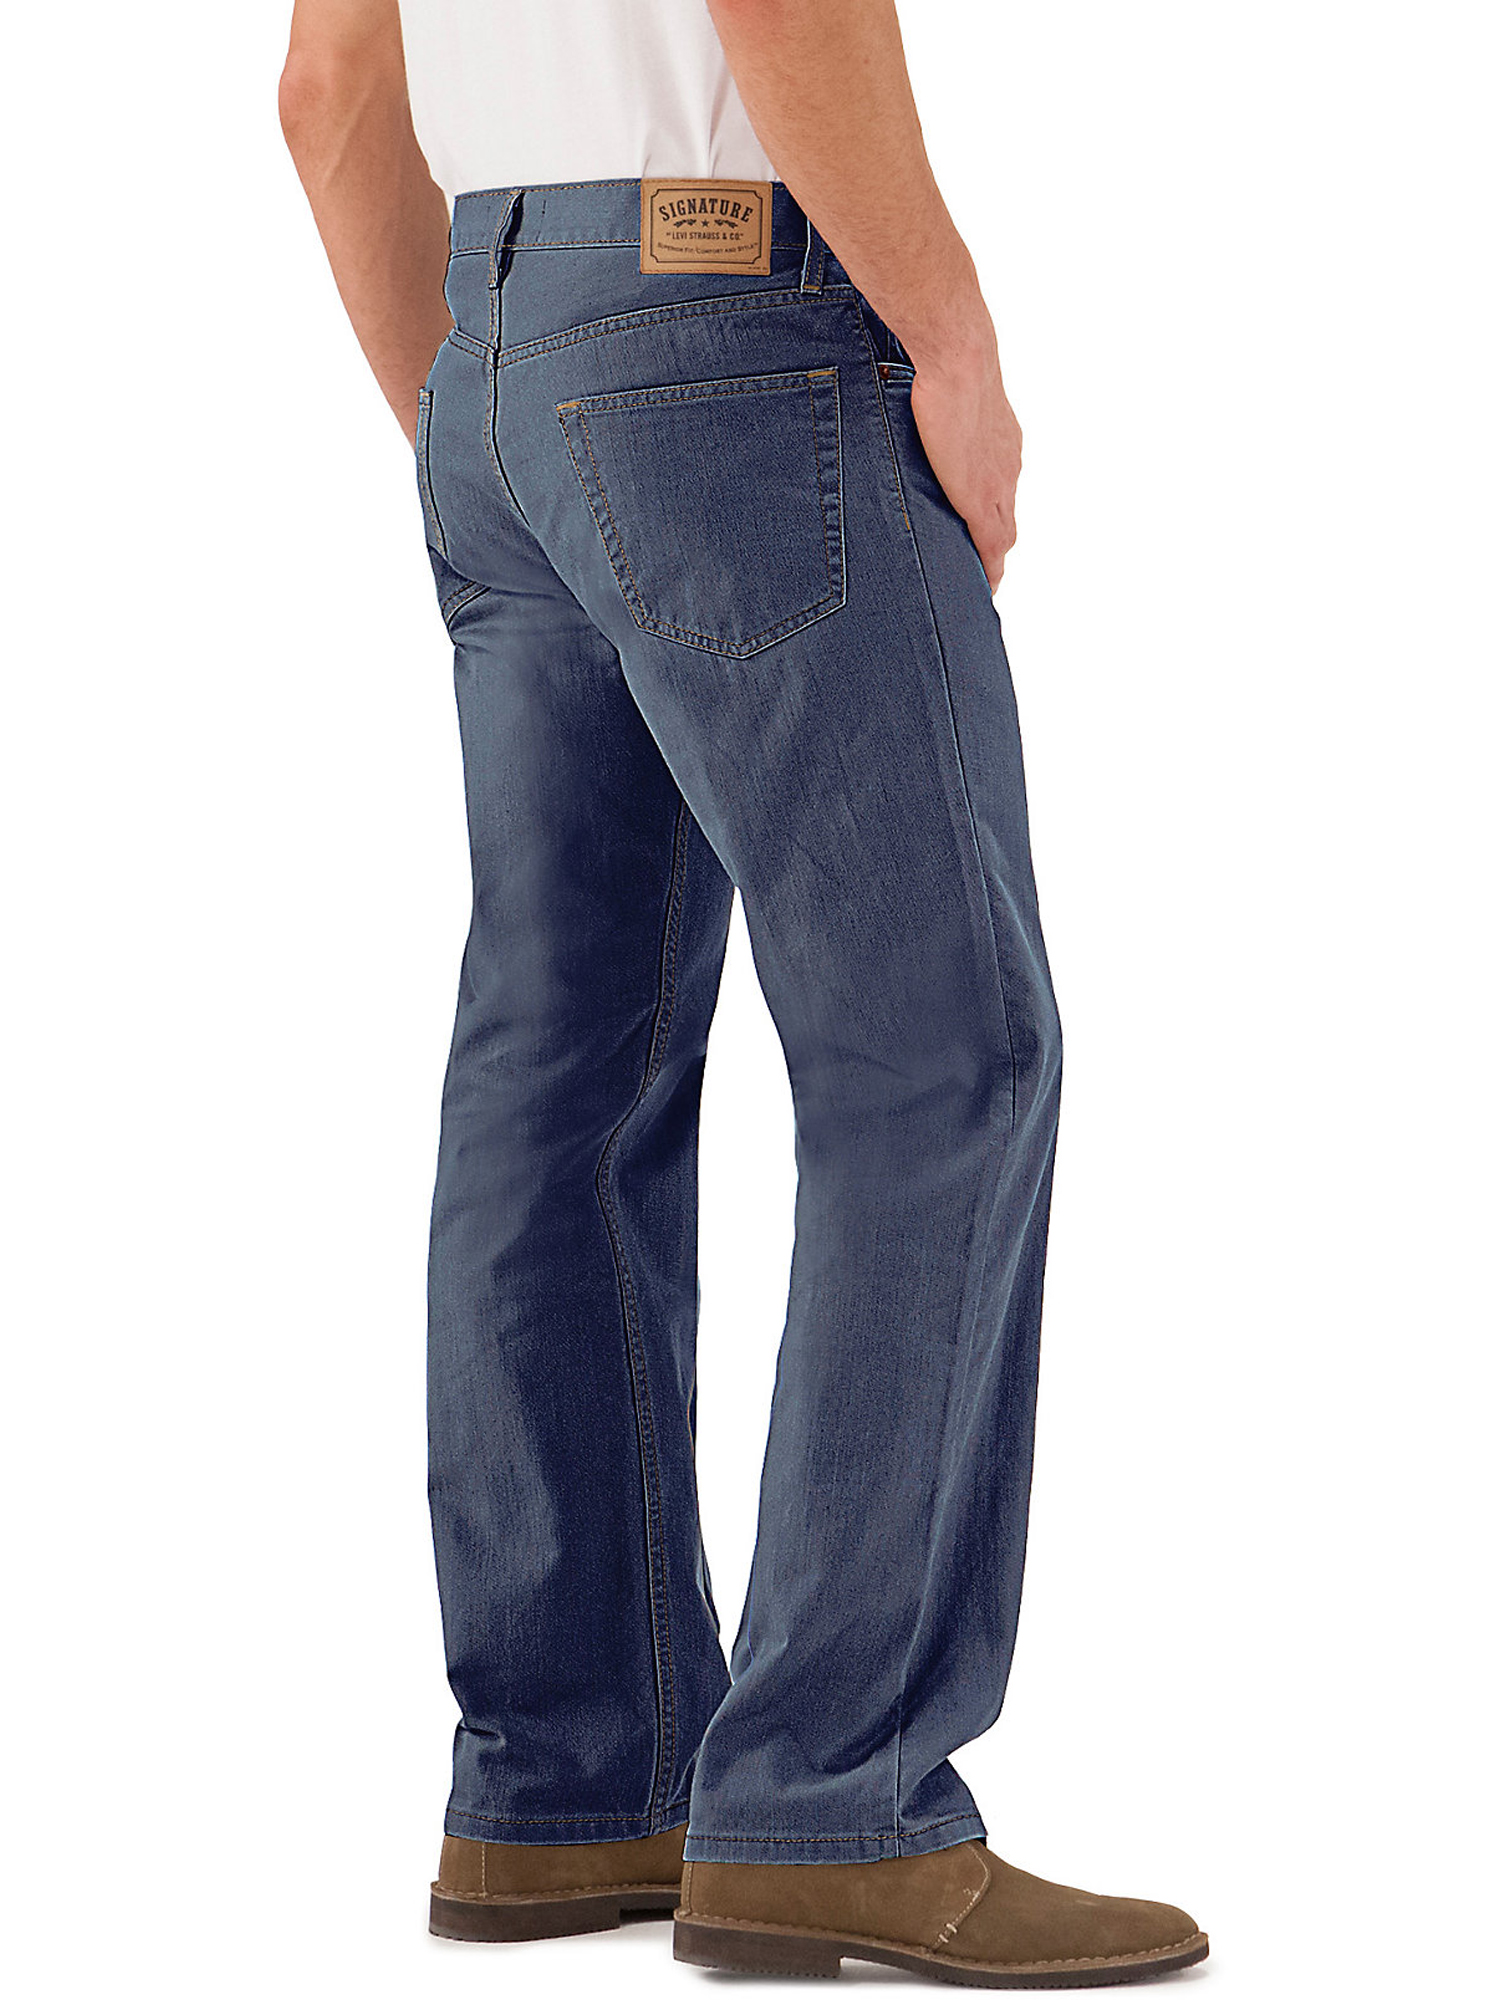 Signature by Levi Strauss & Co. Men's and Big and Tall Relaxed Fit Jeans - image 4 of 6